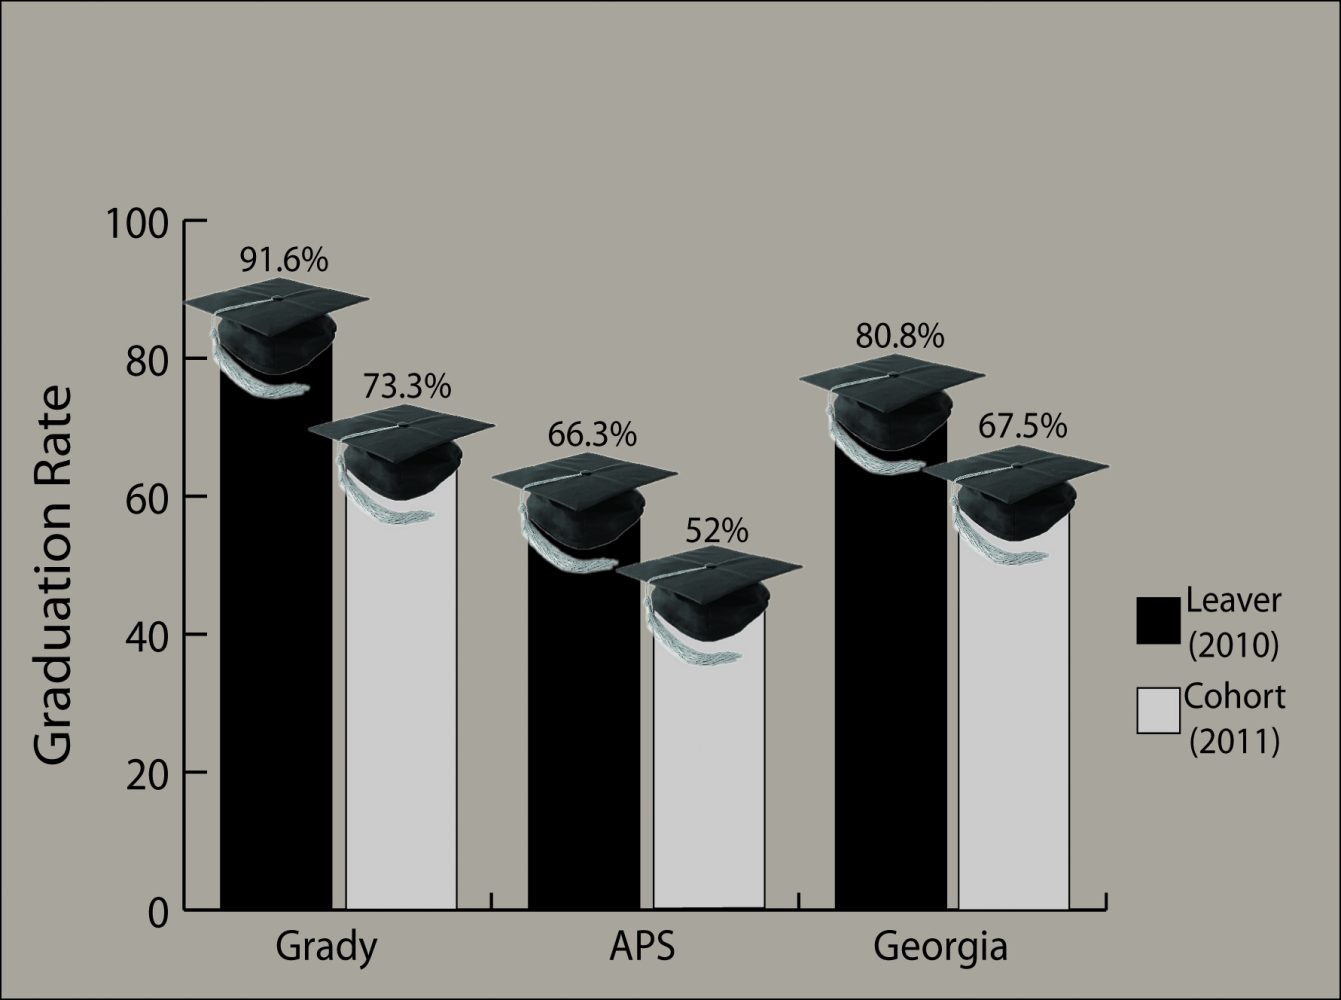 While Gradys graduation rate has been higher than the average graduation rate in APS and across Georgia, the graduation rate plummeted for the class of 2011, when it was calculated with the Cohort rate instead of the Leaver rate.